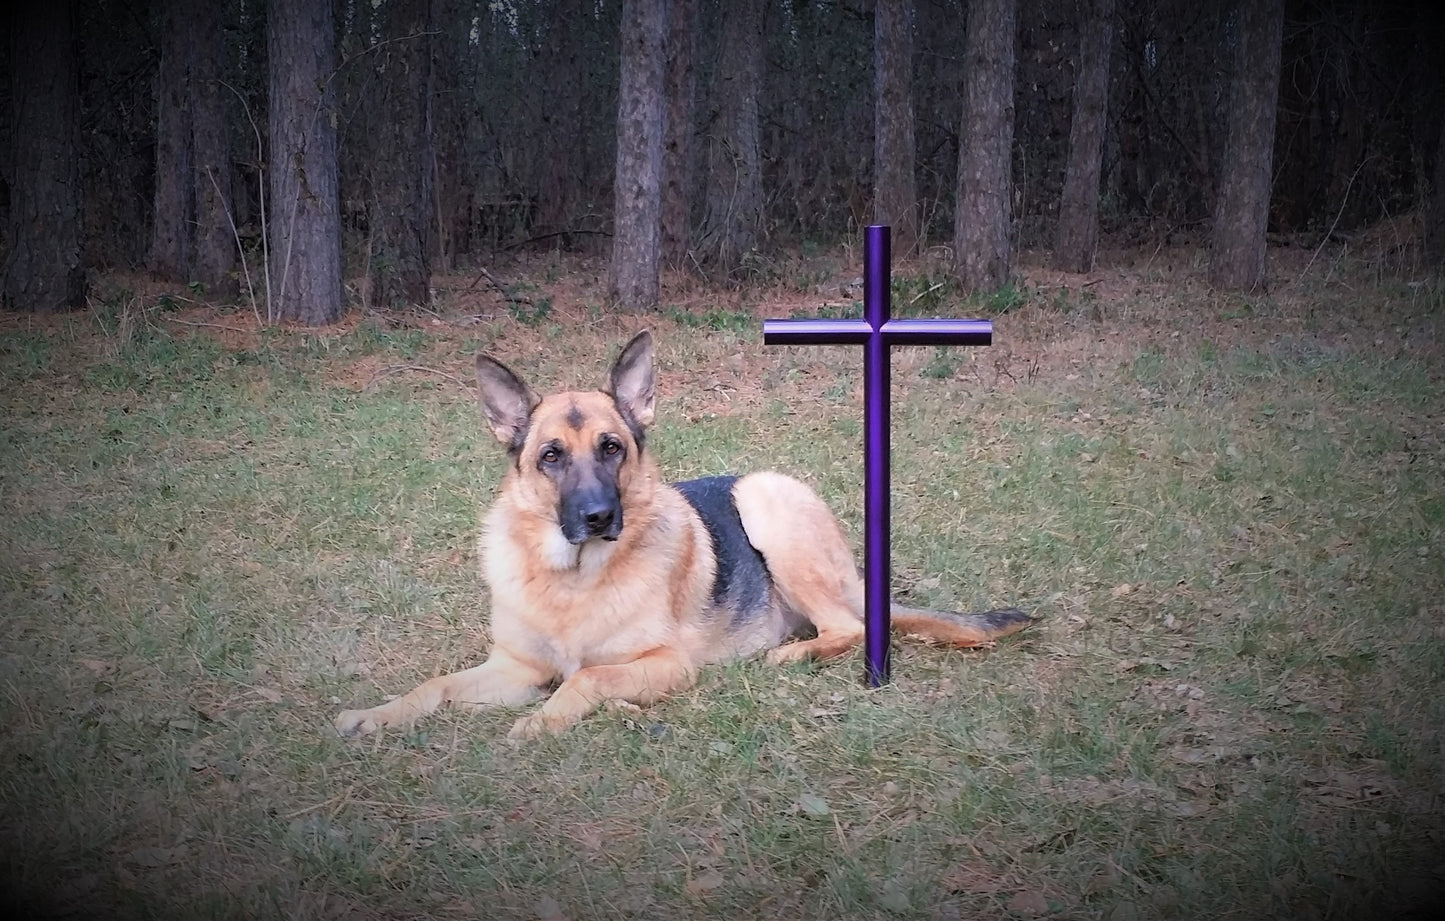 Loss Of Our Pet Is Remember With The Everlasting Cross Memorial. Their Favorite Spot In The Yard, Pet Cremation Urn, Customized Engraving To Celebrate The Memories Shared